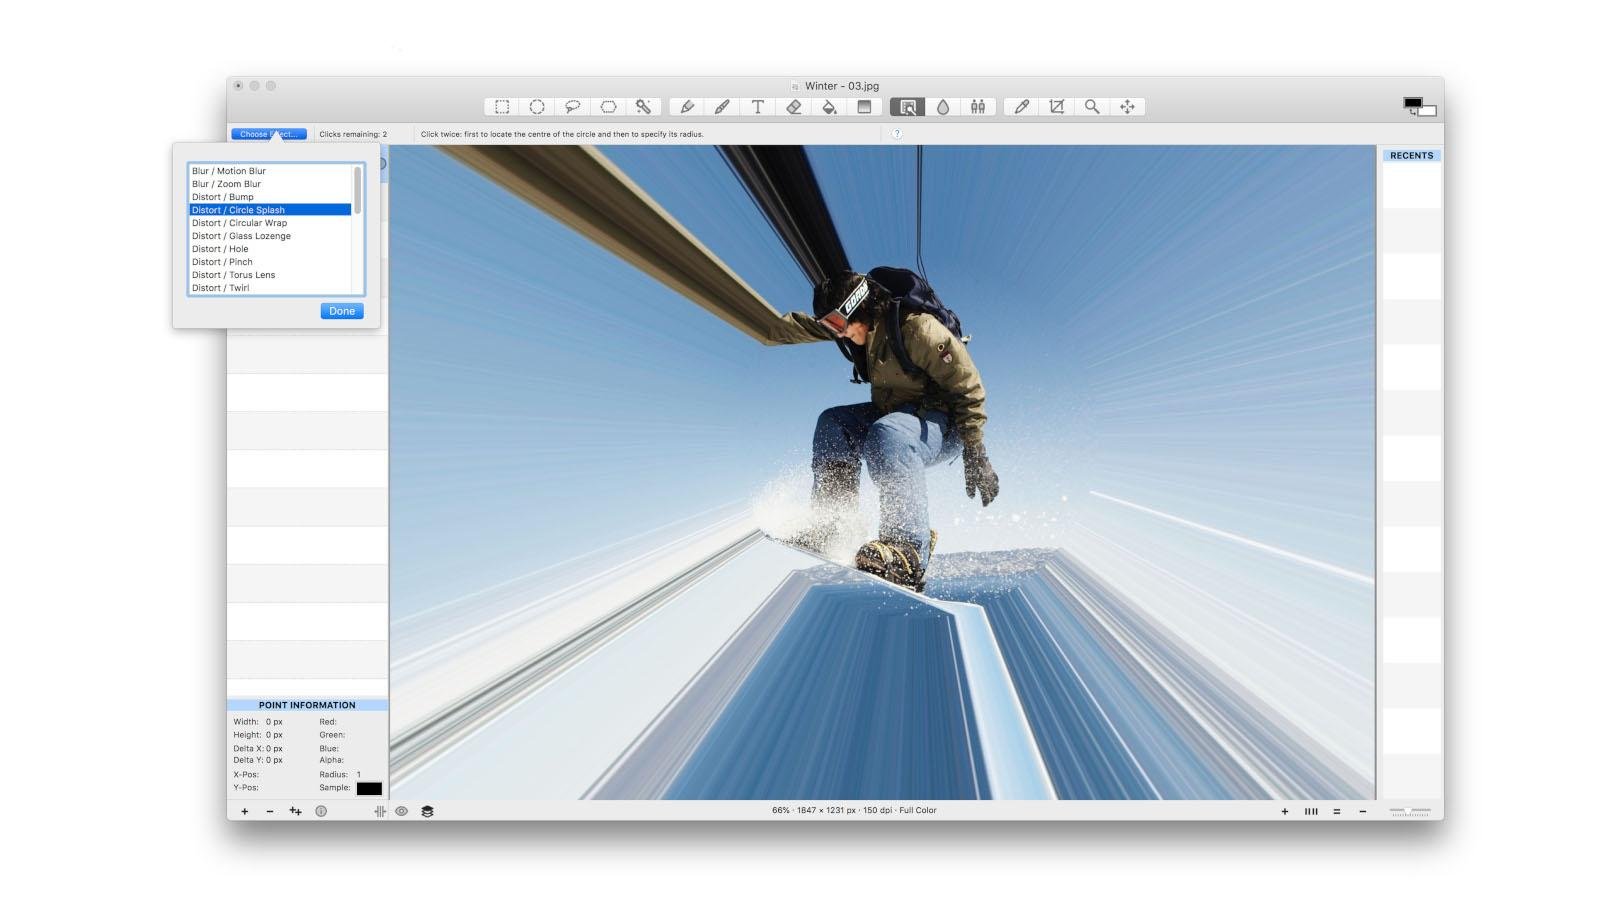 what is the best photo viewing software for mac